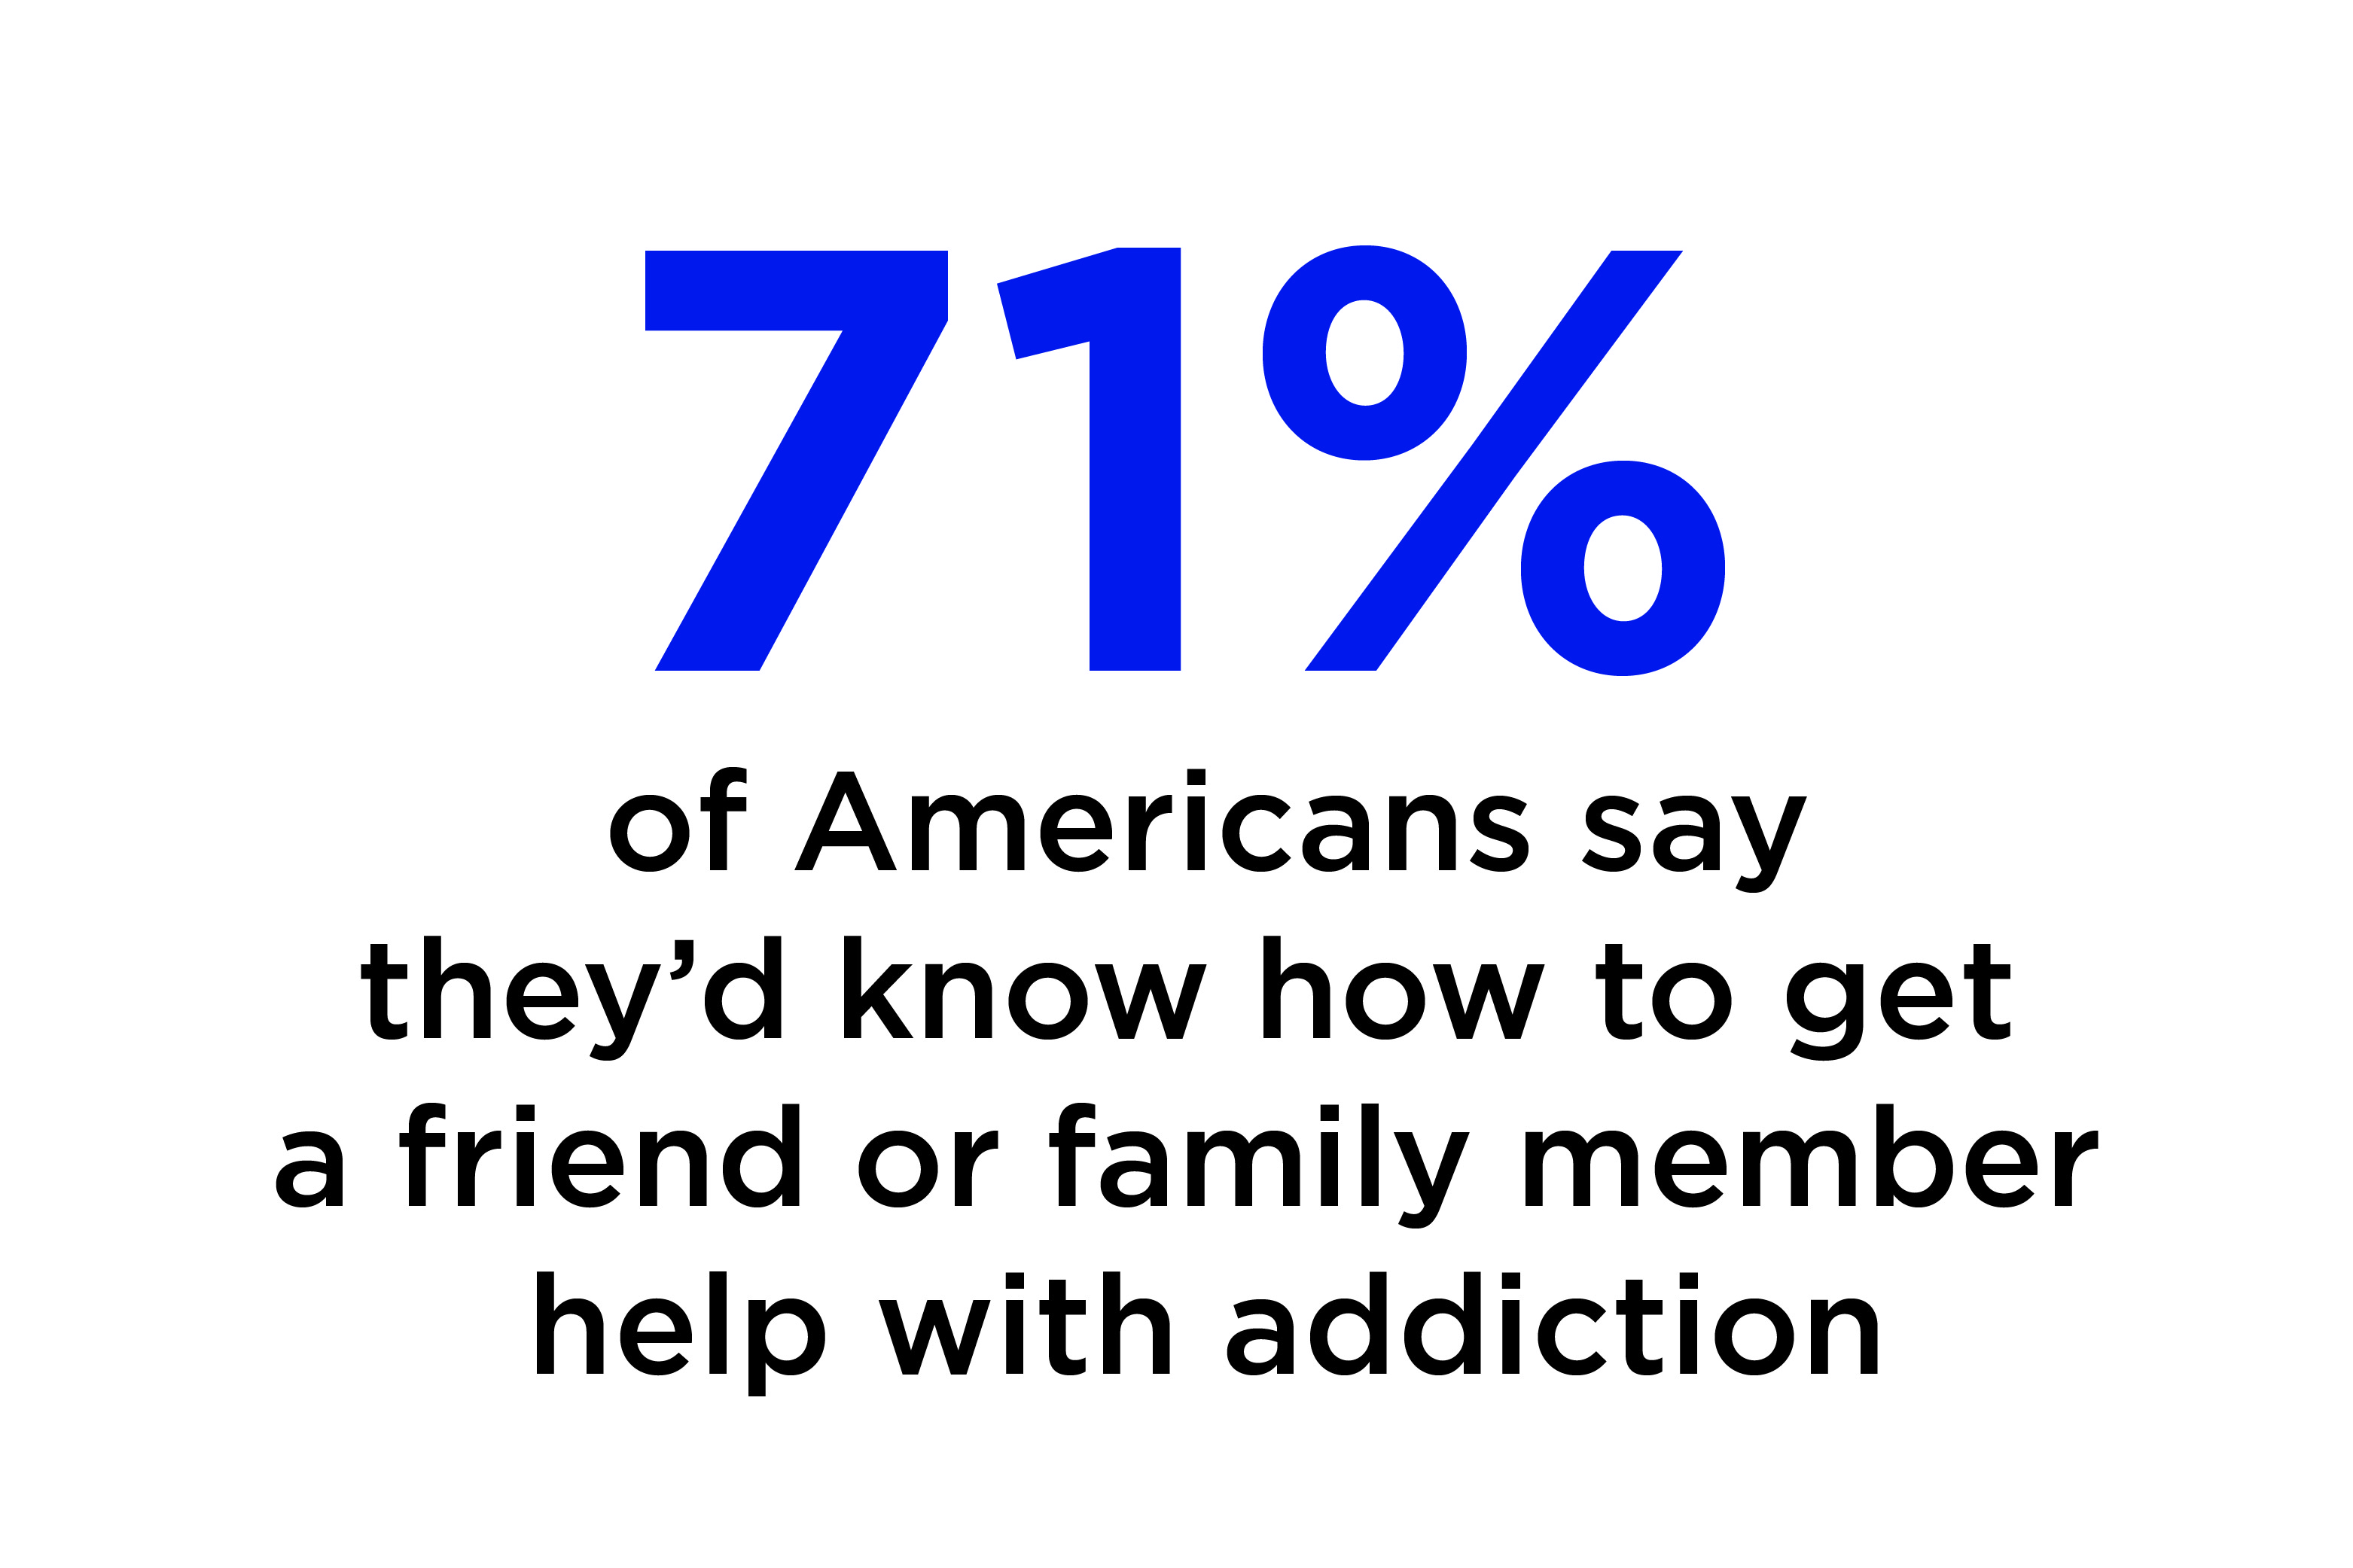 71% of americans say they'd know how to get a friend or family member help with addiction